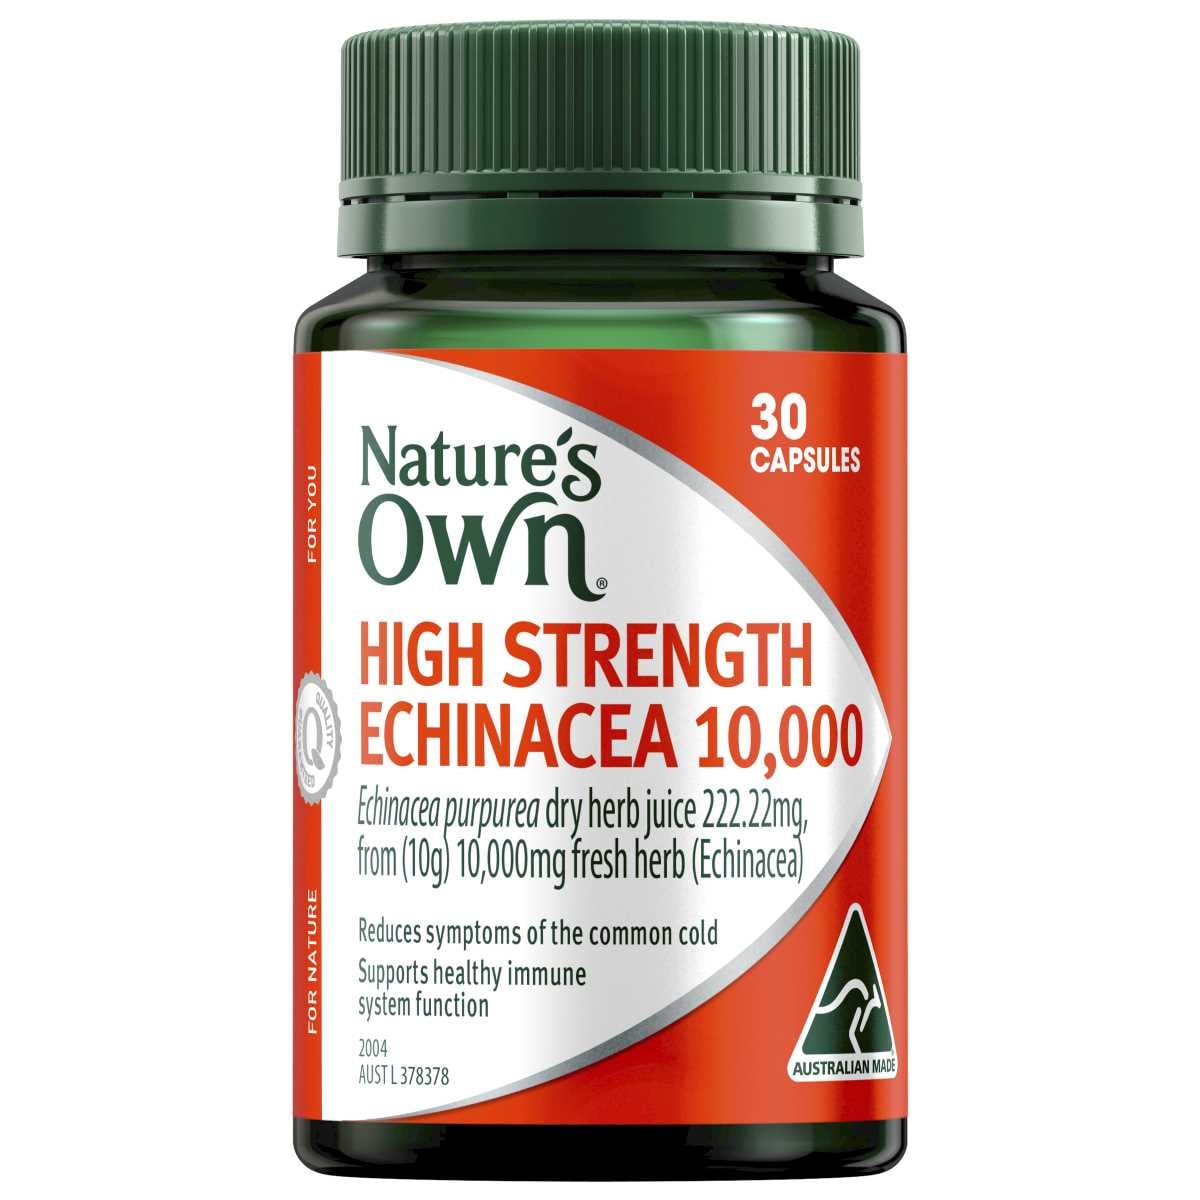 Natures Own High Strength Echinacea 10000mg 30 Capsules